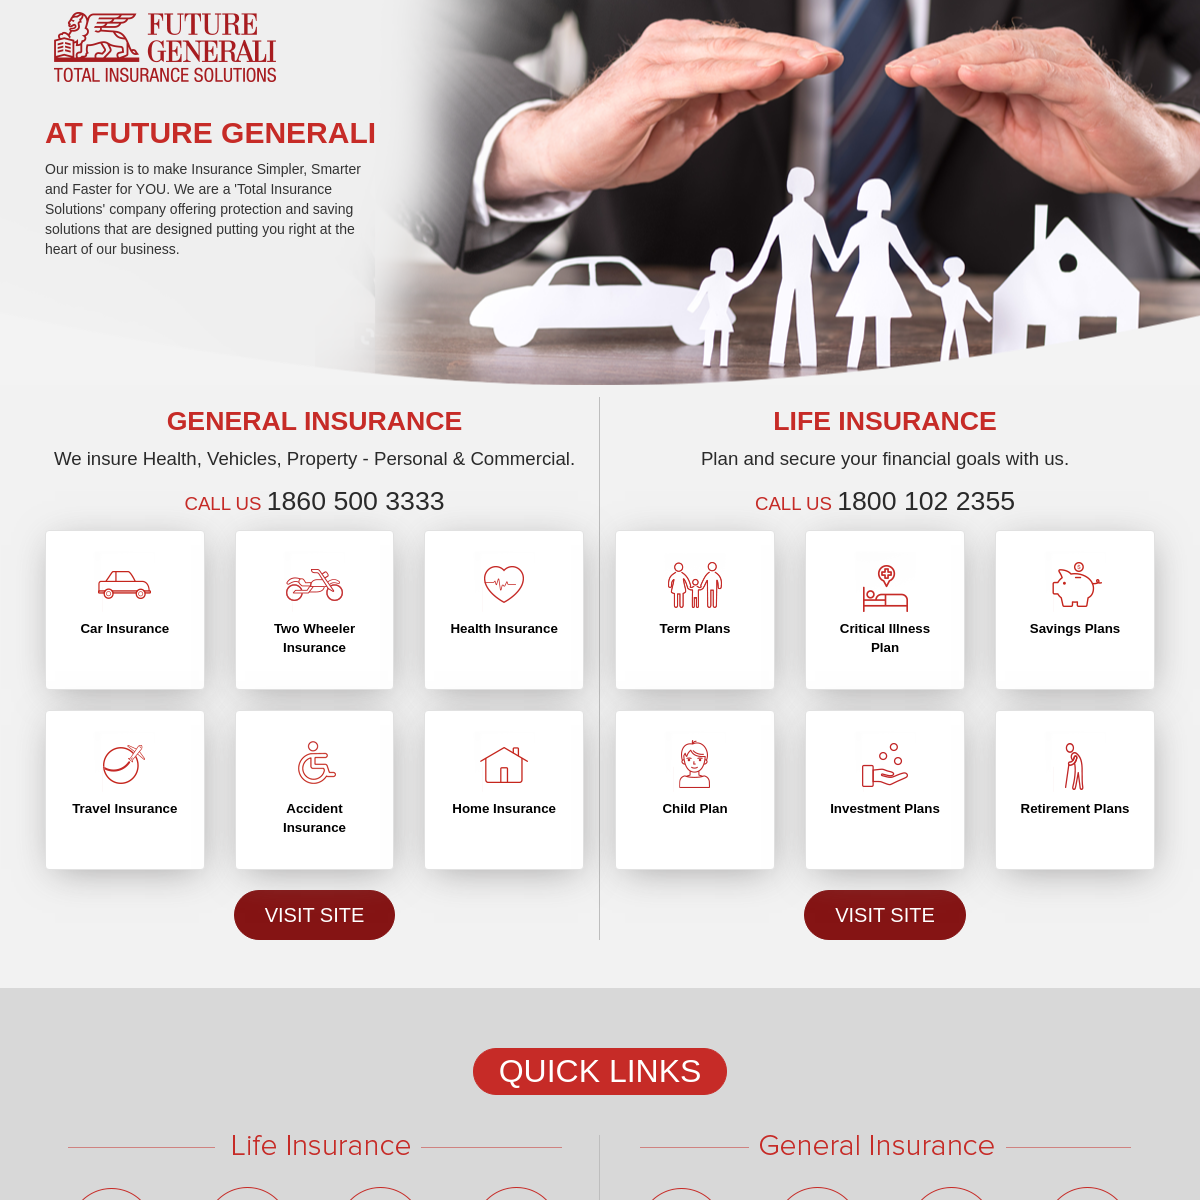 future-generali-a-total-insurance-solutions-company-in-india-archived-2021-08-18